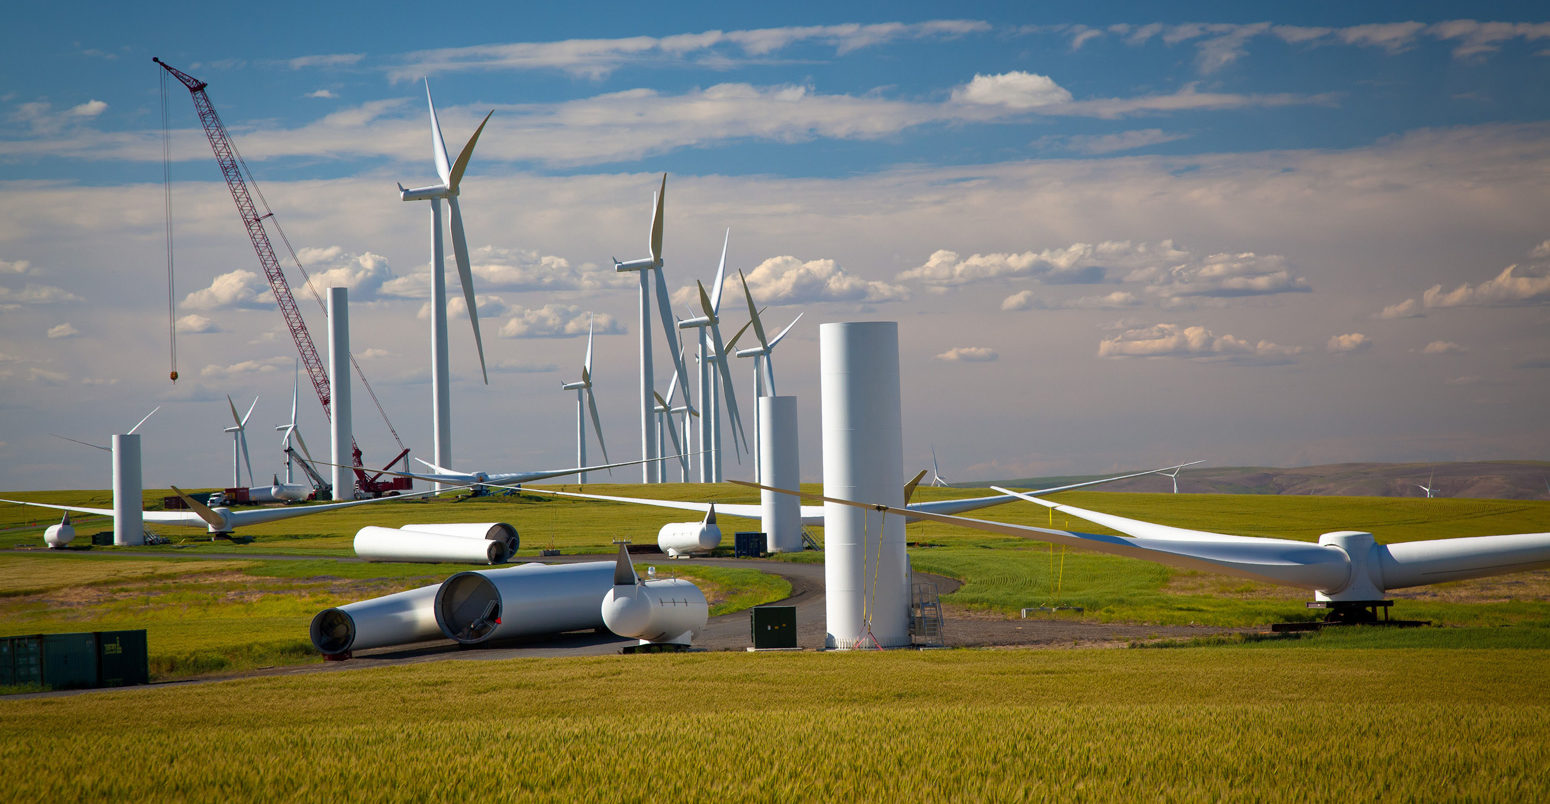 Wind turbines in the Lower Snake River Wind Energy Project, Washington, USA